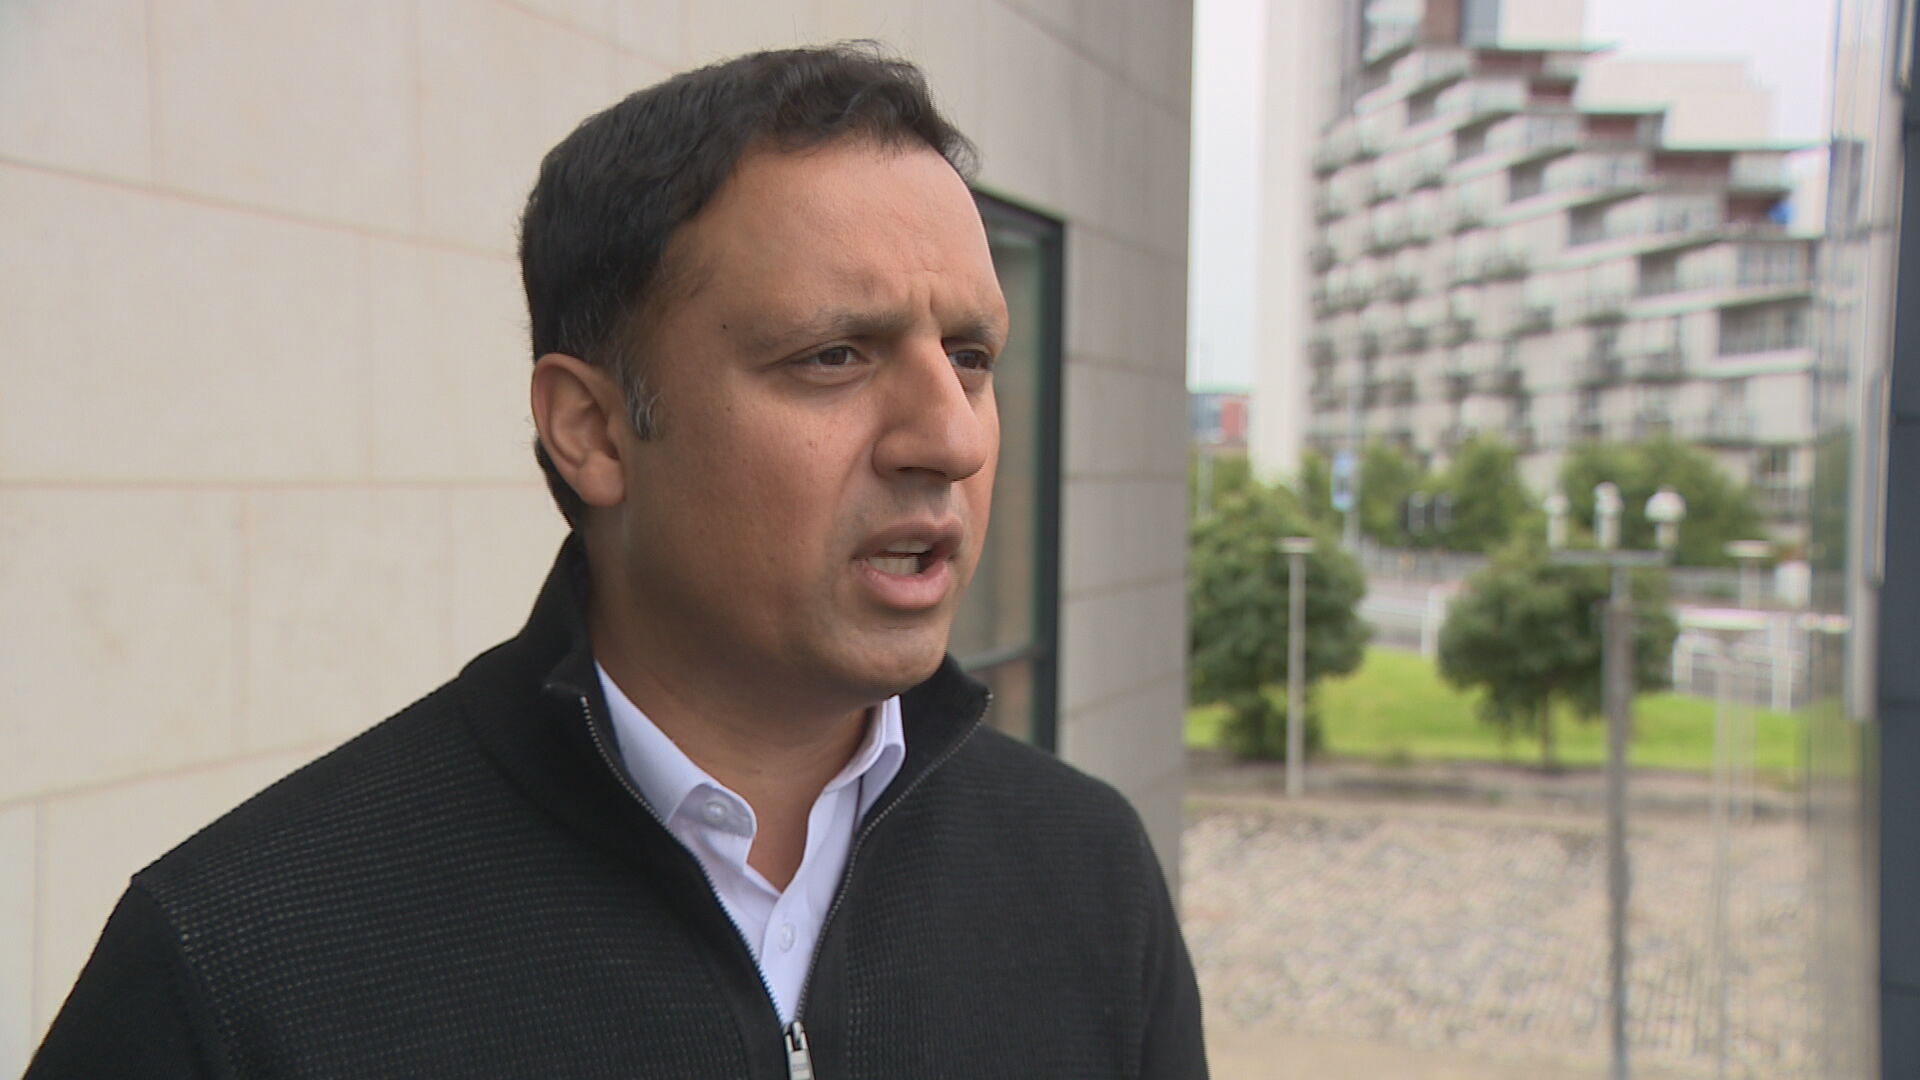 Anas Sarwar said the Scottish and UK governments are in 'meltdown'.